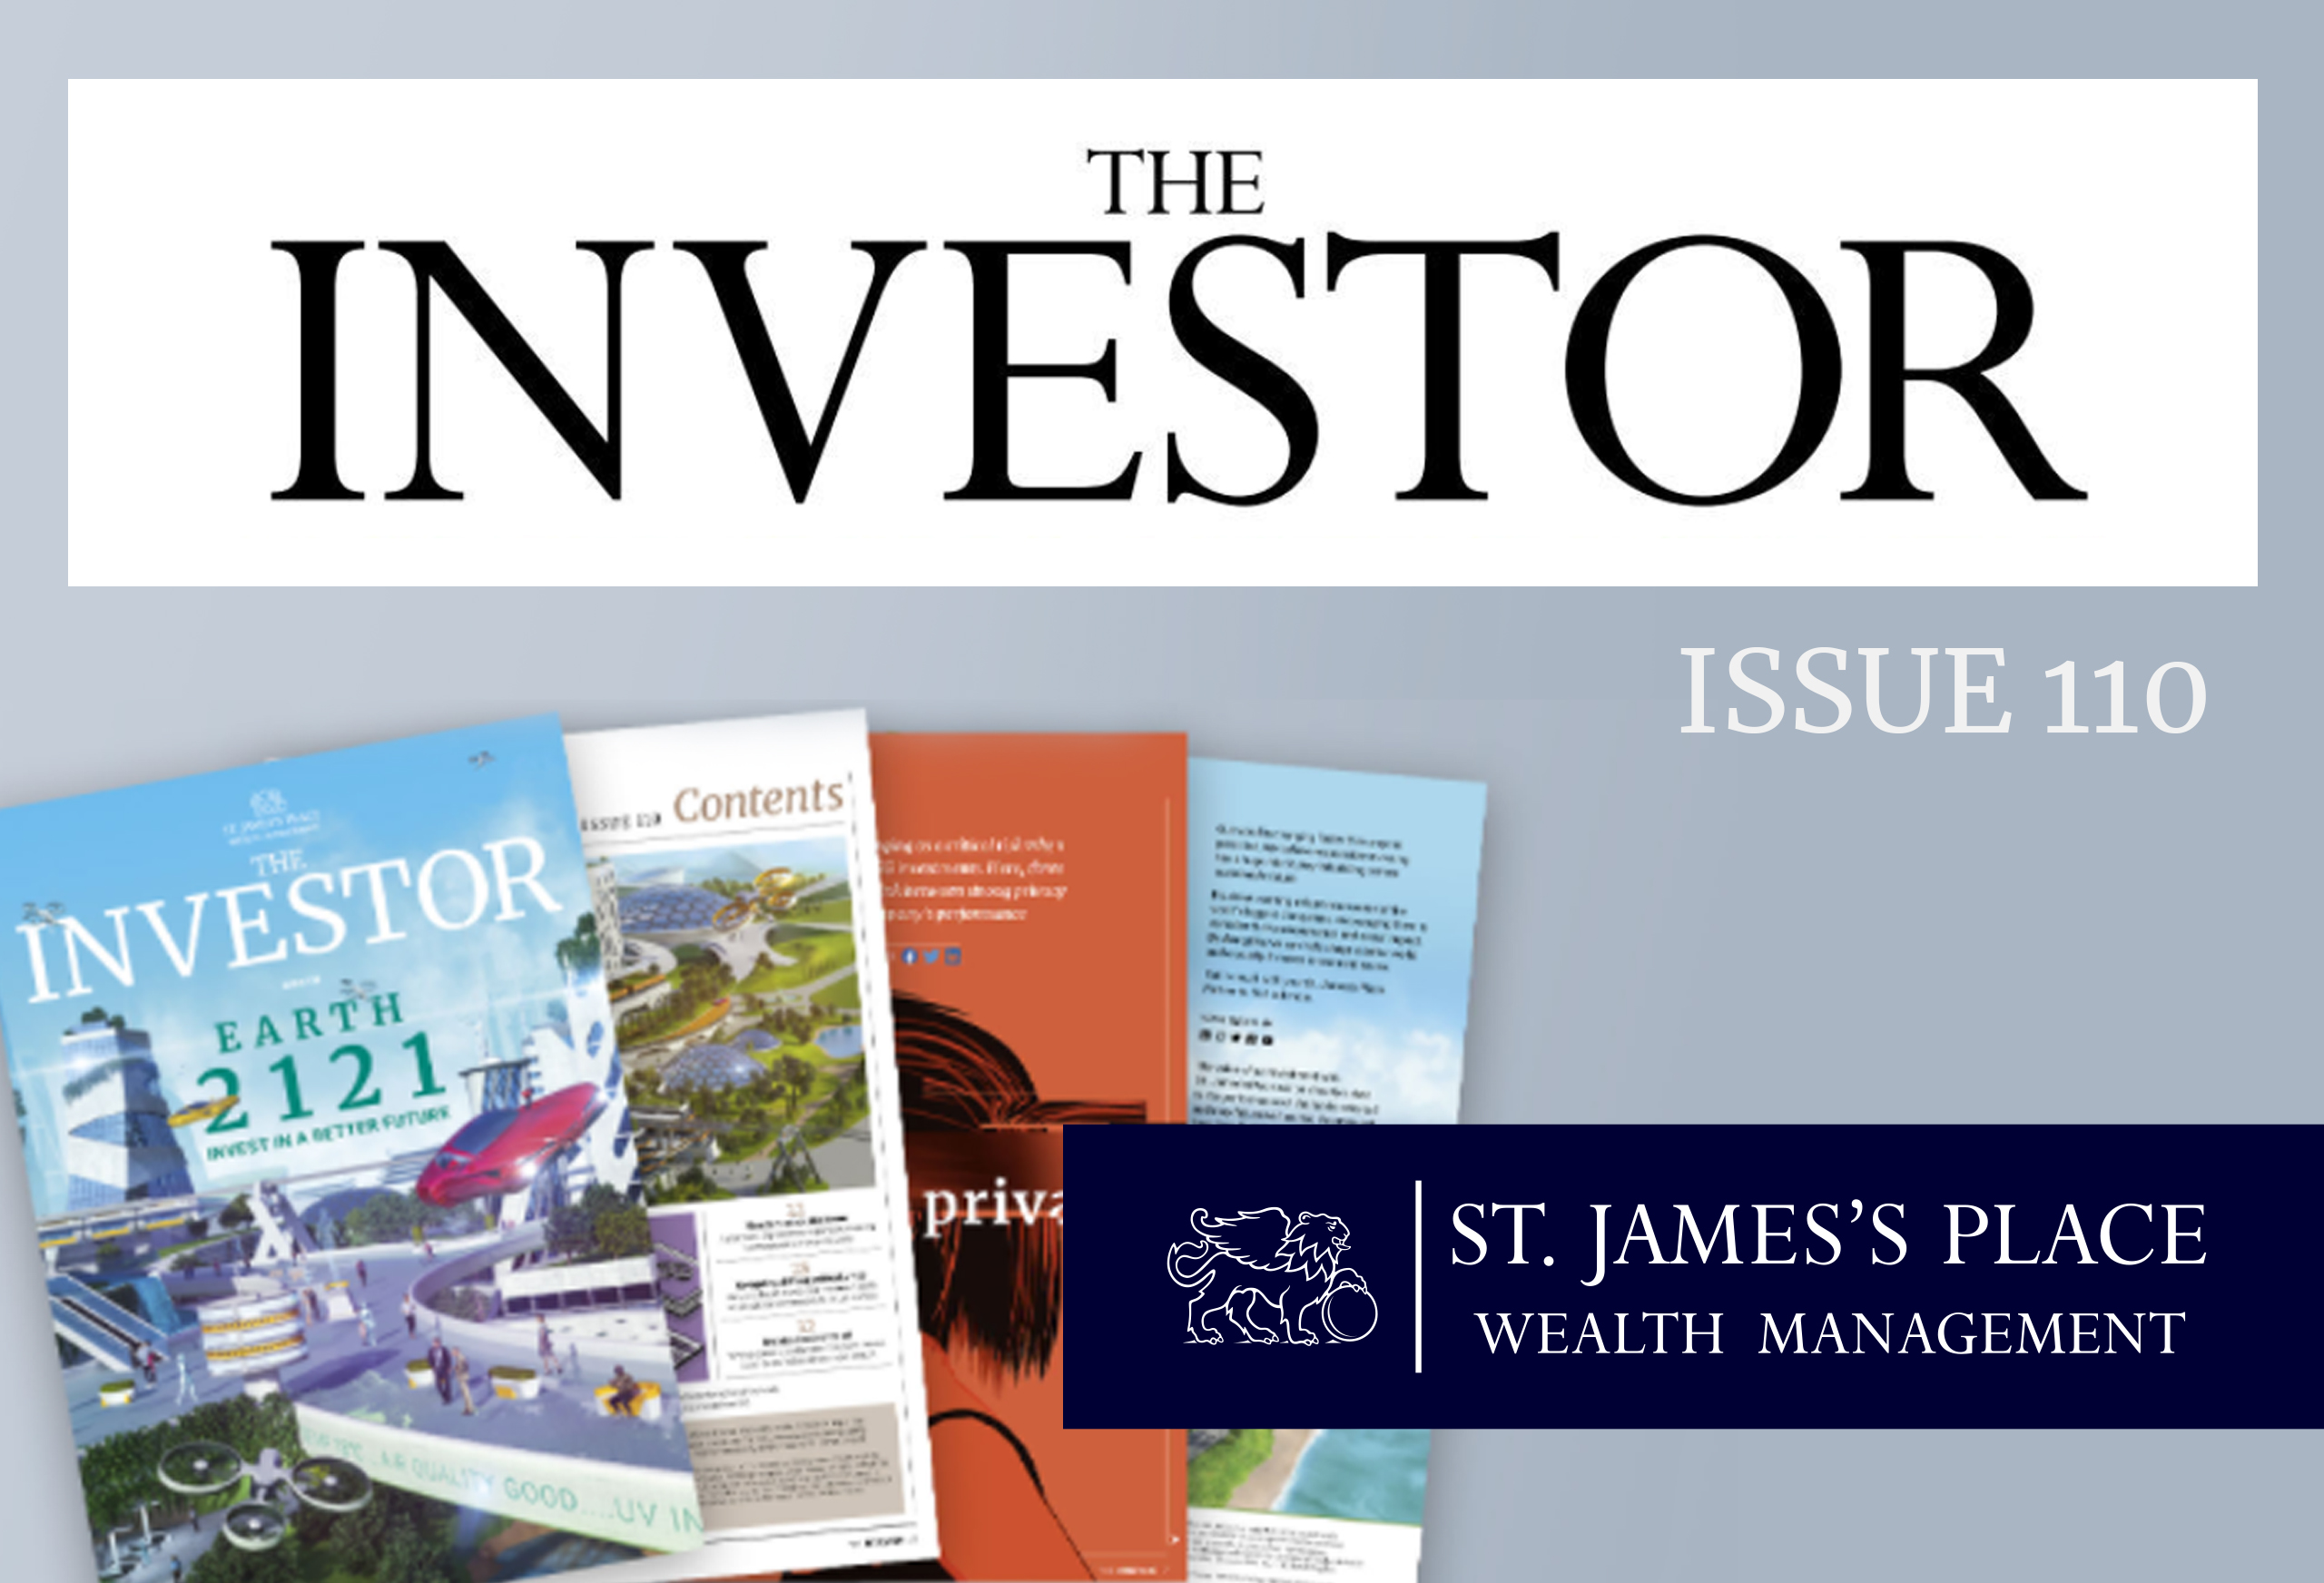 The Investor, the magazine from St. James’s Place – Issue 110